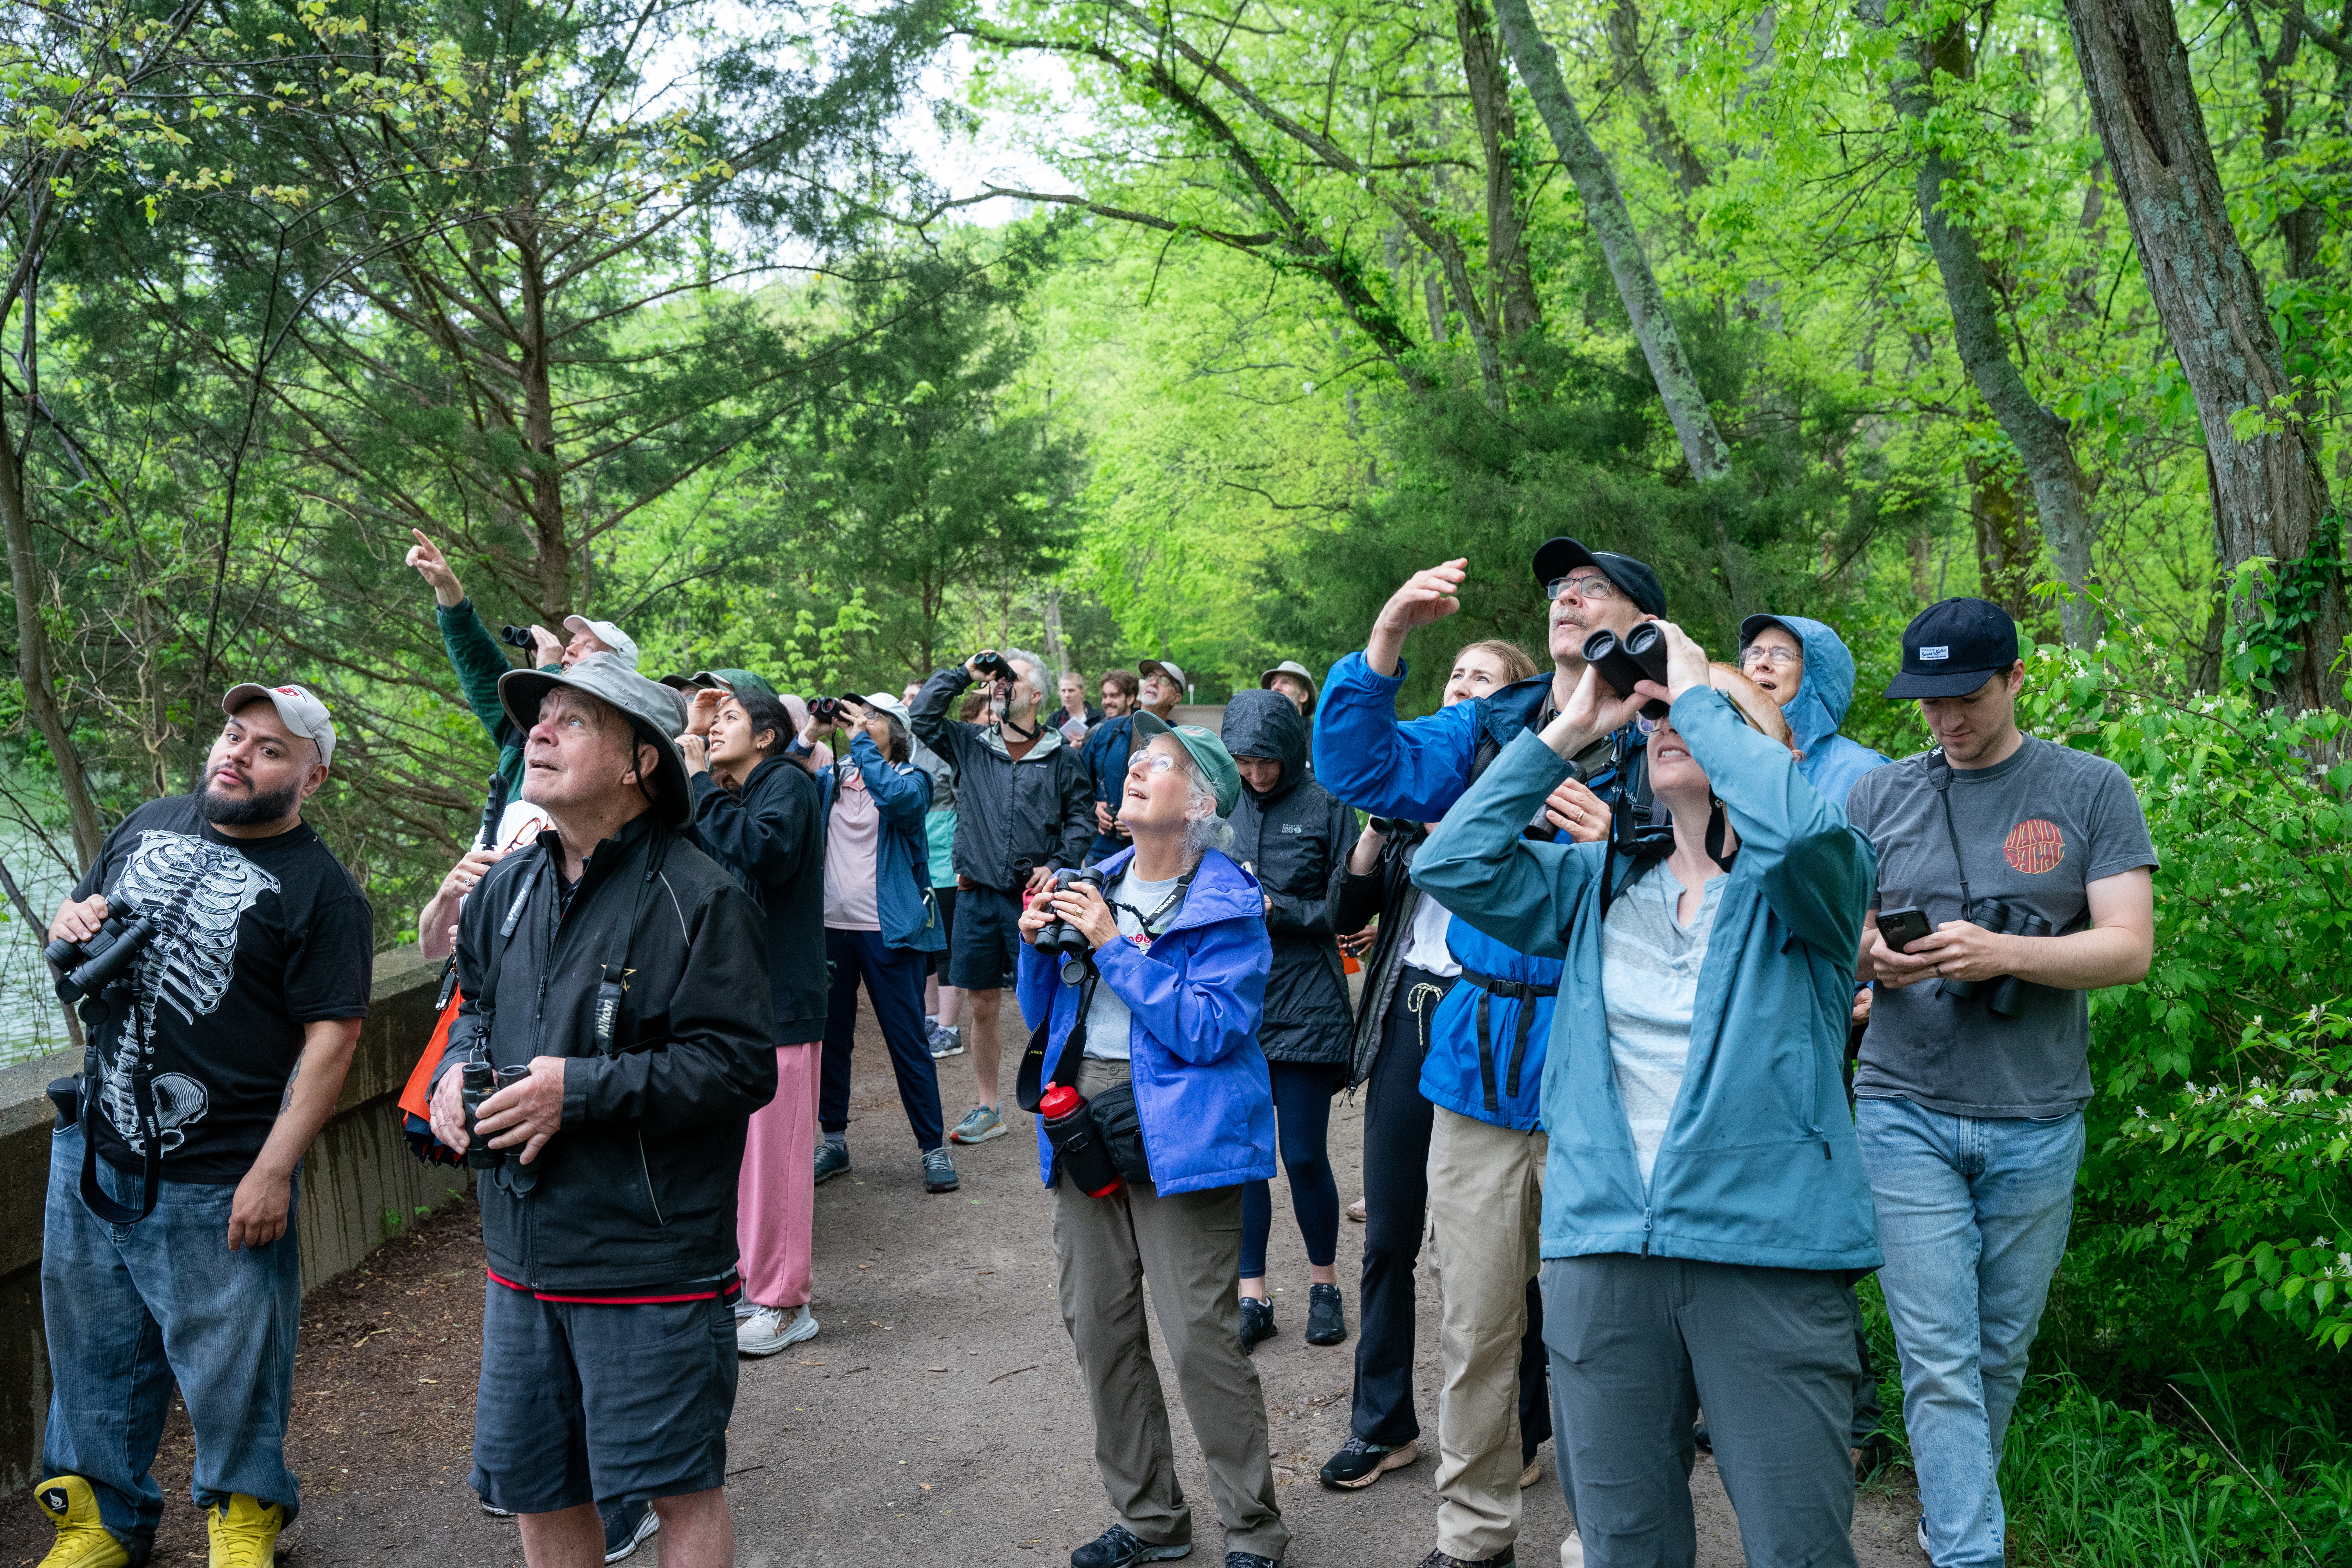 Students and community members birding together at Radnor Lake